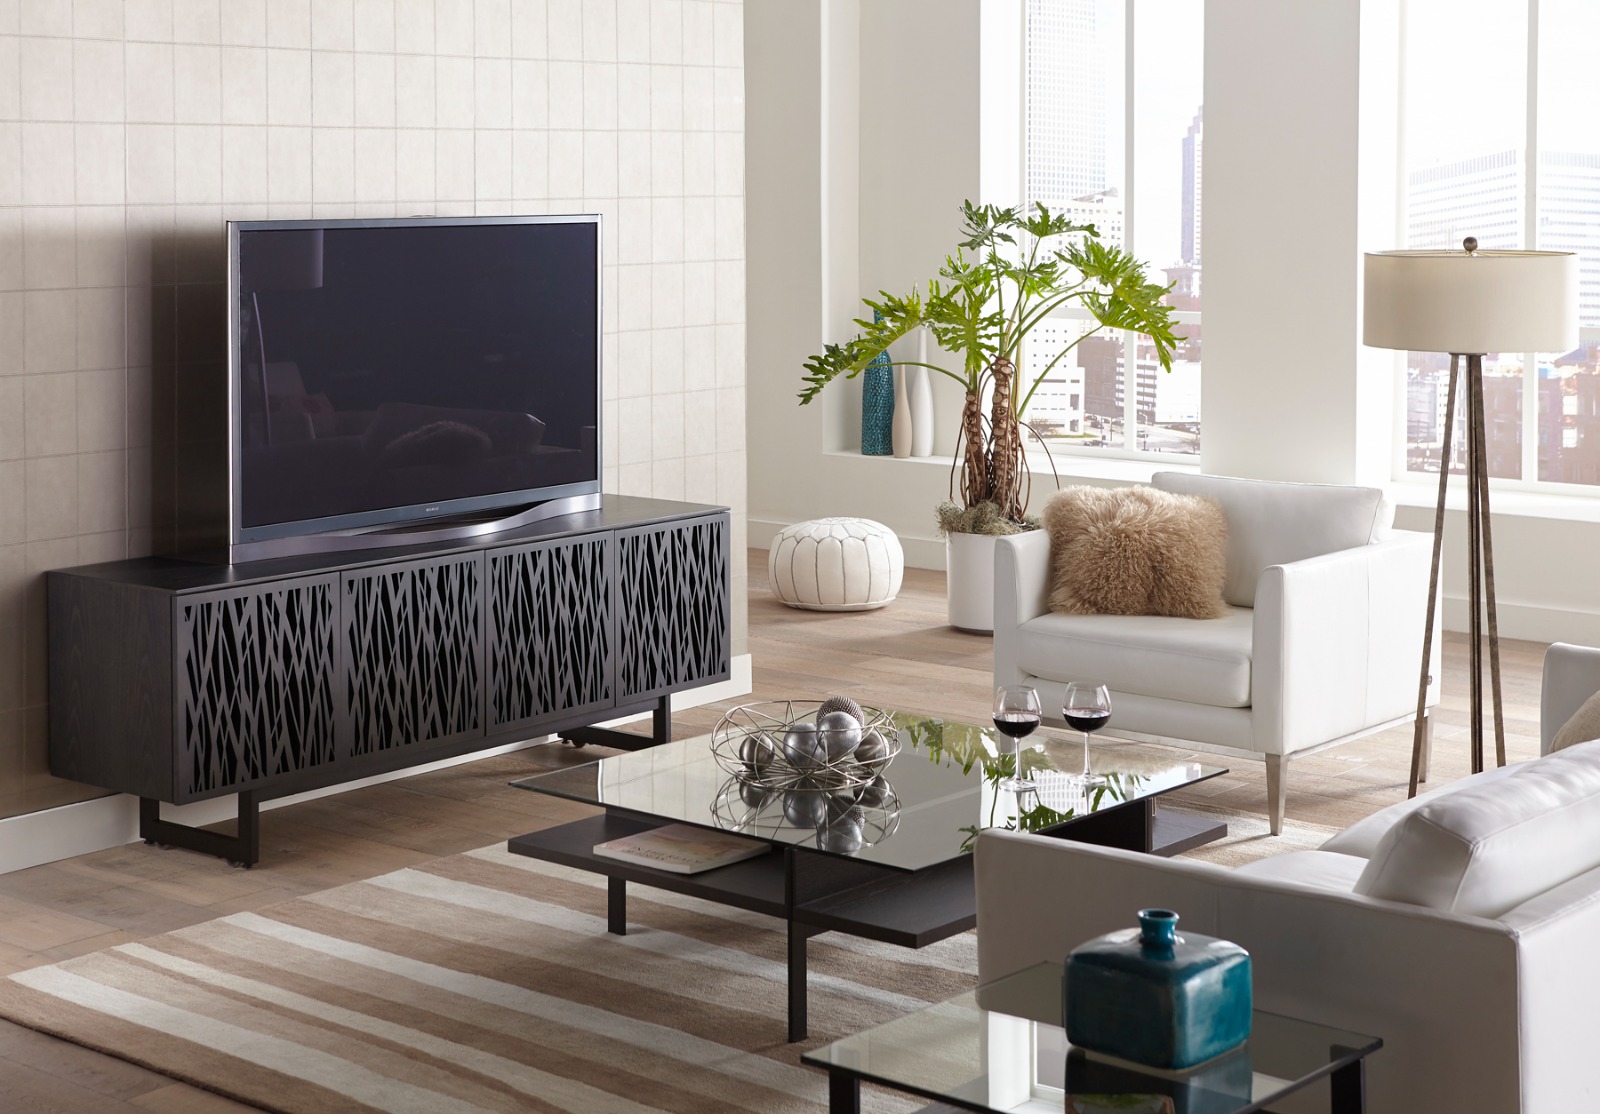 Selecting the Ideal Media Furniture for Your Home Entertainment Spaces